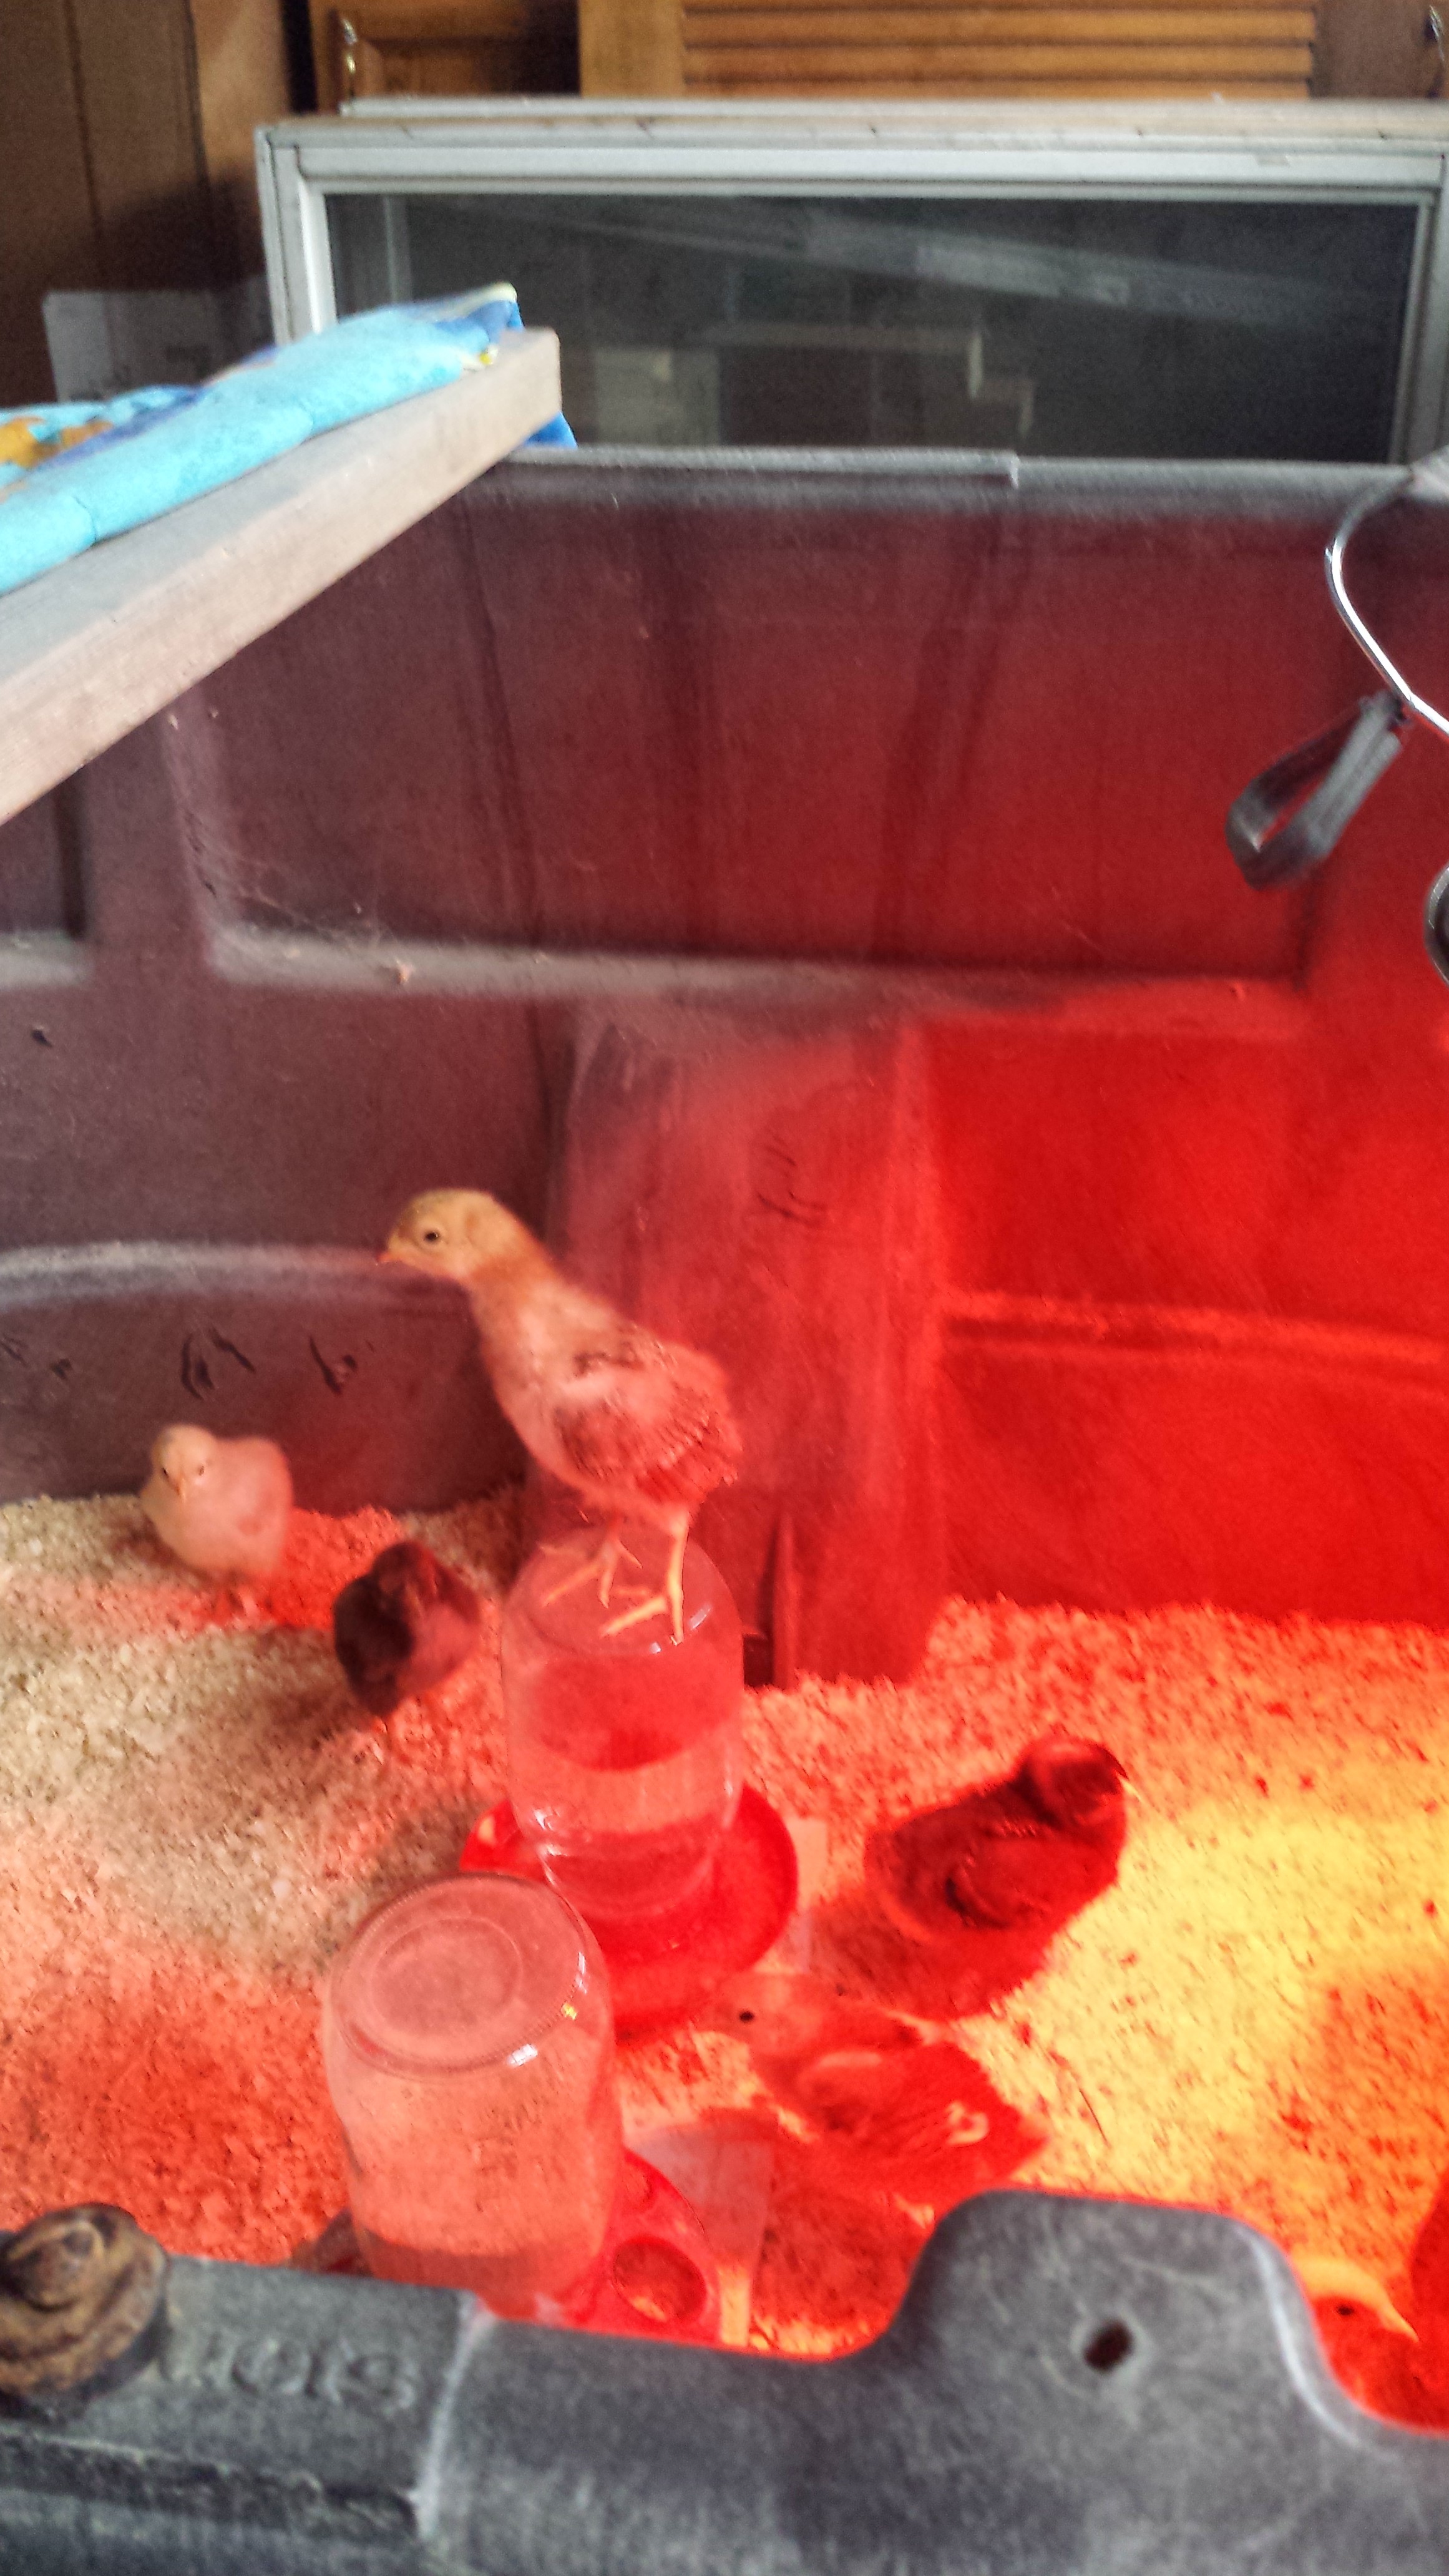 One morning I went to check on my girls and this is what I found!